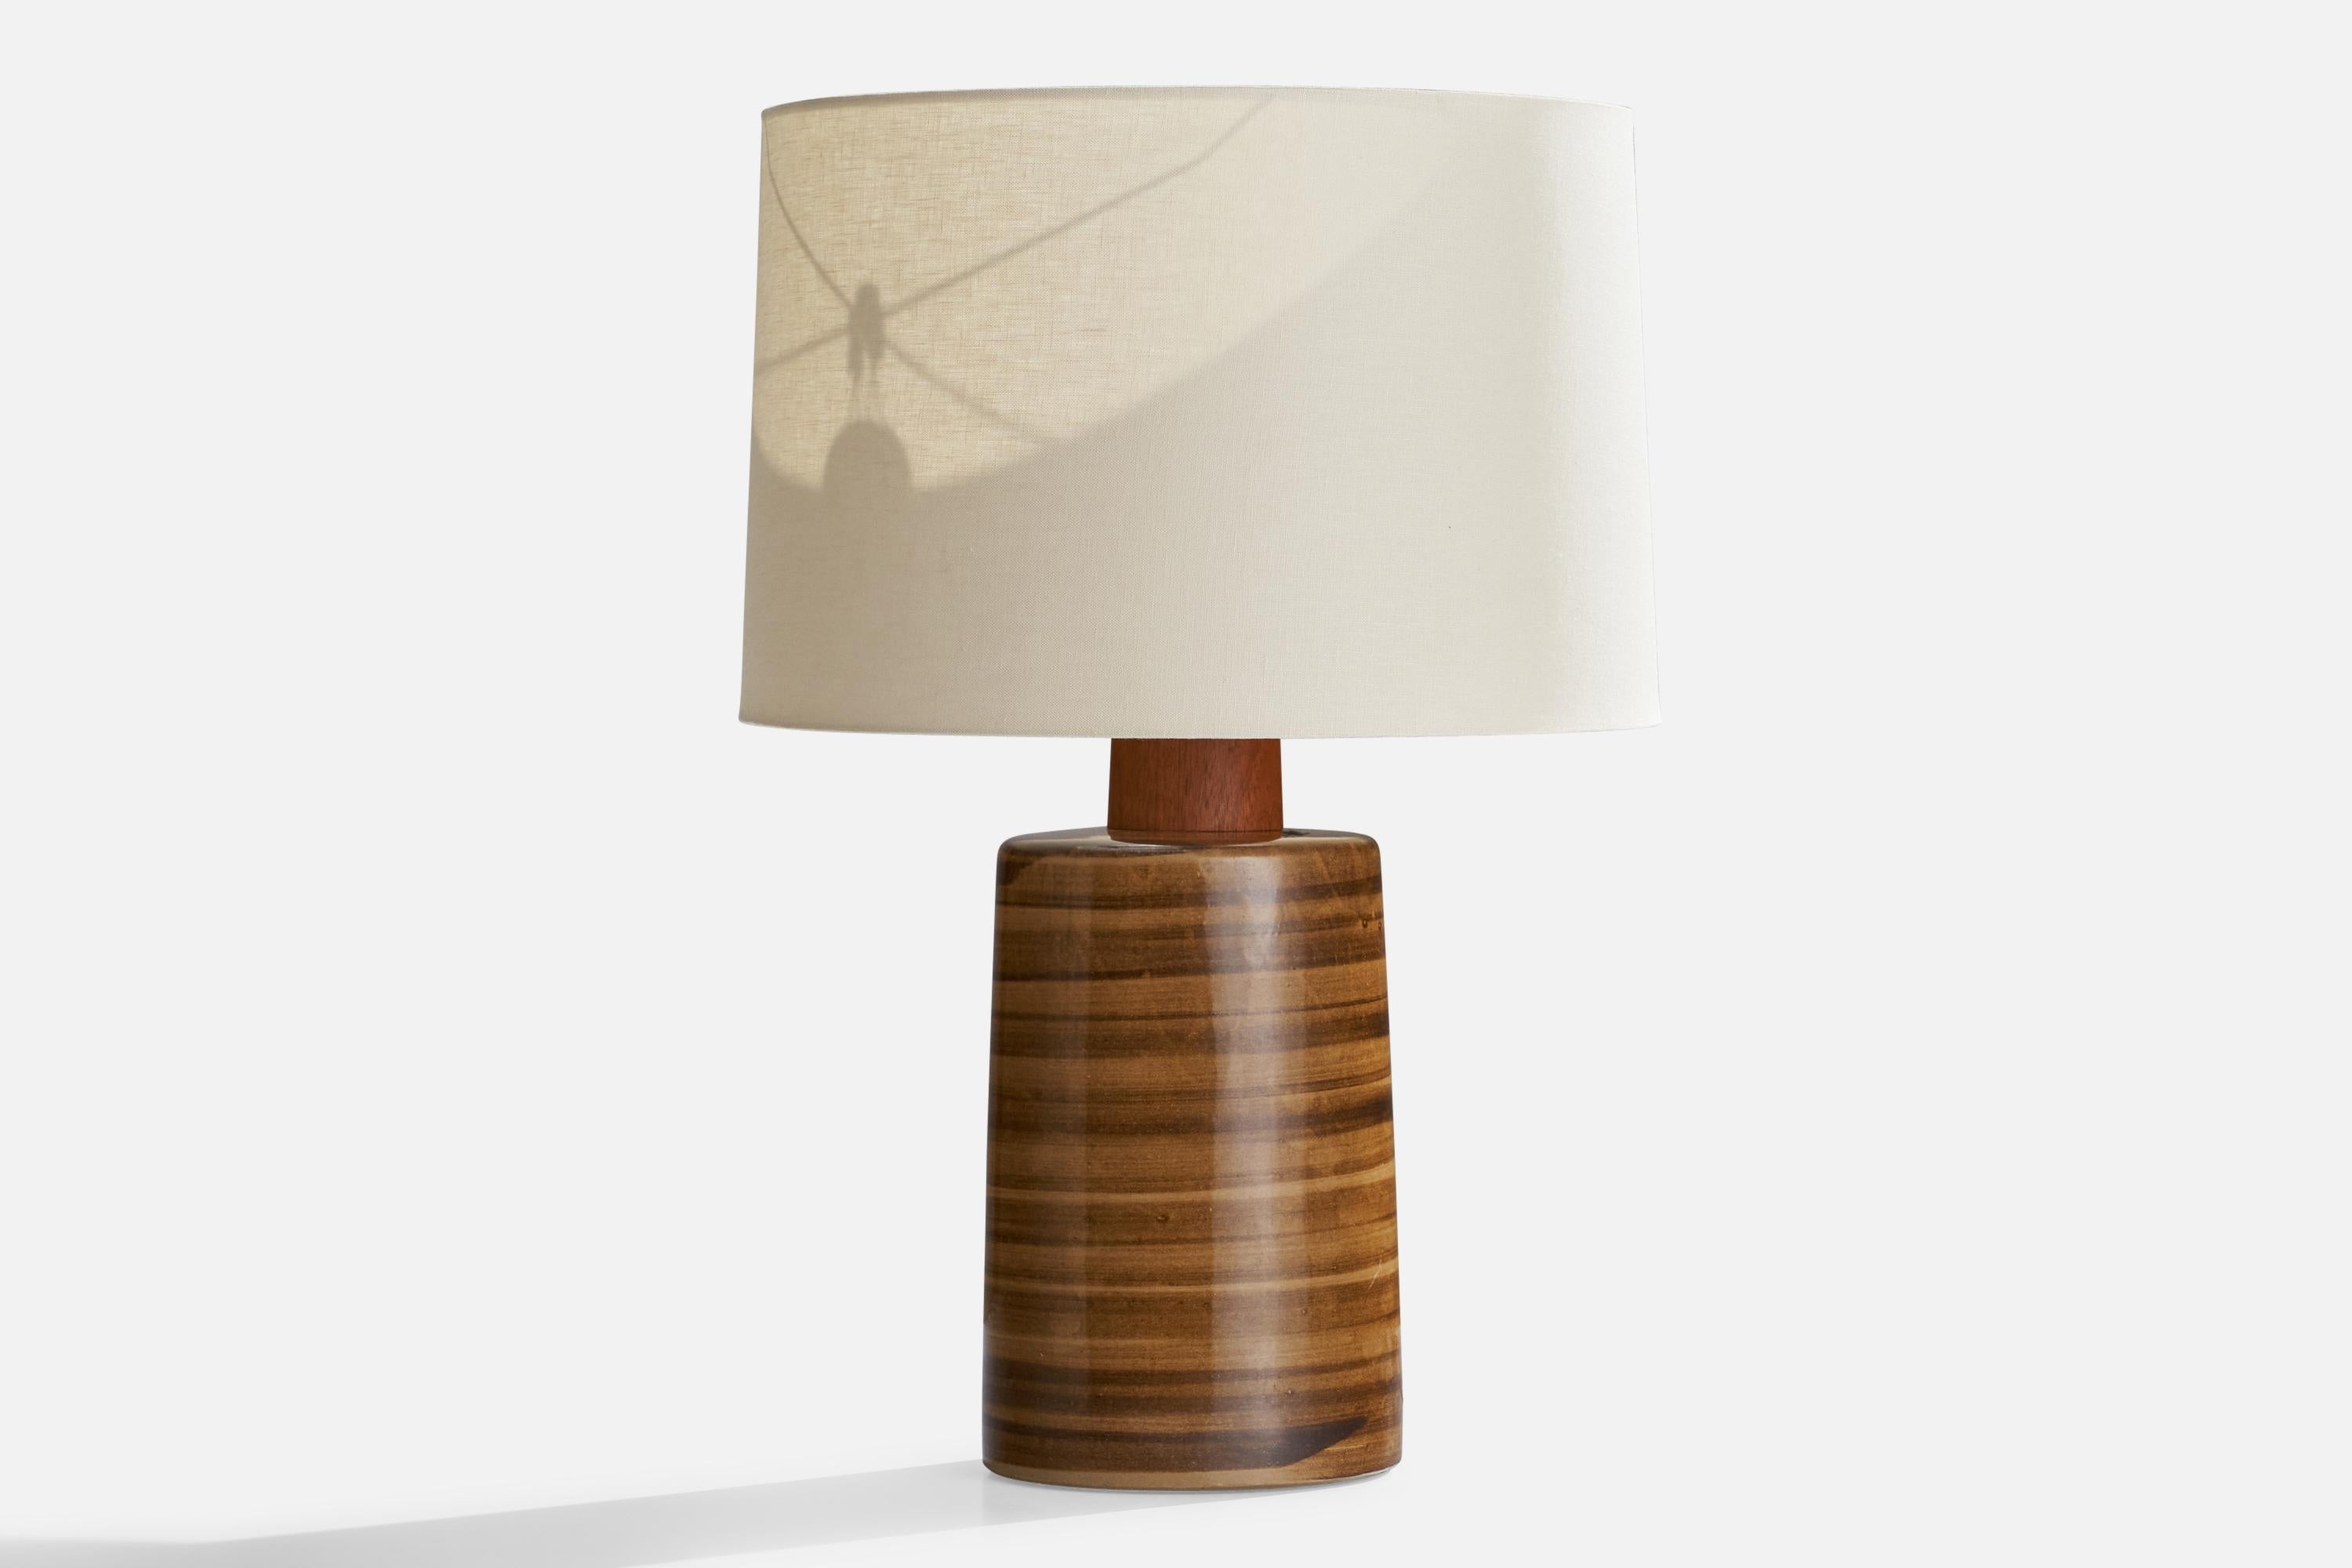 A brown and black-glazed ceramic and walnut table lamp designed by Jane & Gordon Martz and produced by Marshall Studios, USA, 1960s.

Overall Dimensions (inches): 21.5”  H x 8.25” D
Stated dimensions include shade.
Bulb Specifications: E-26